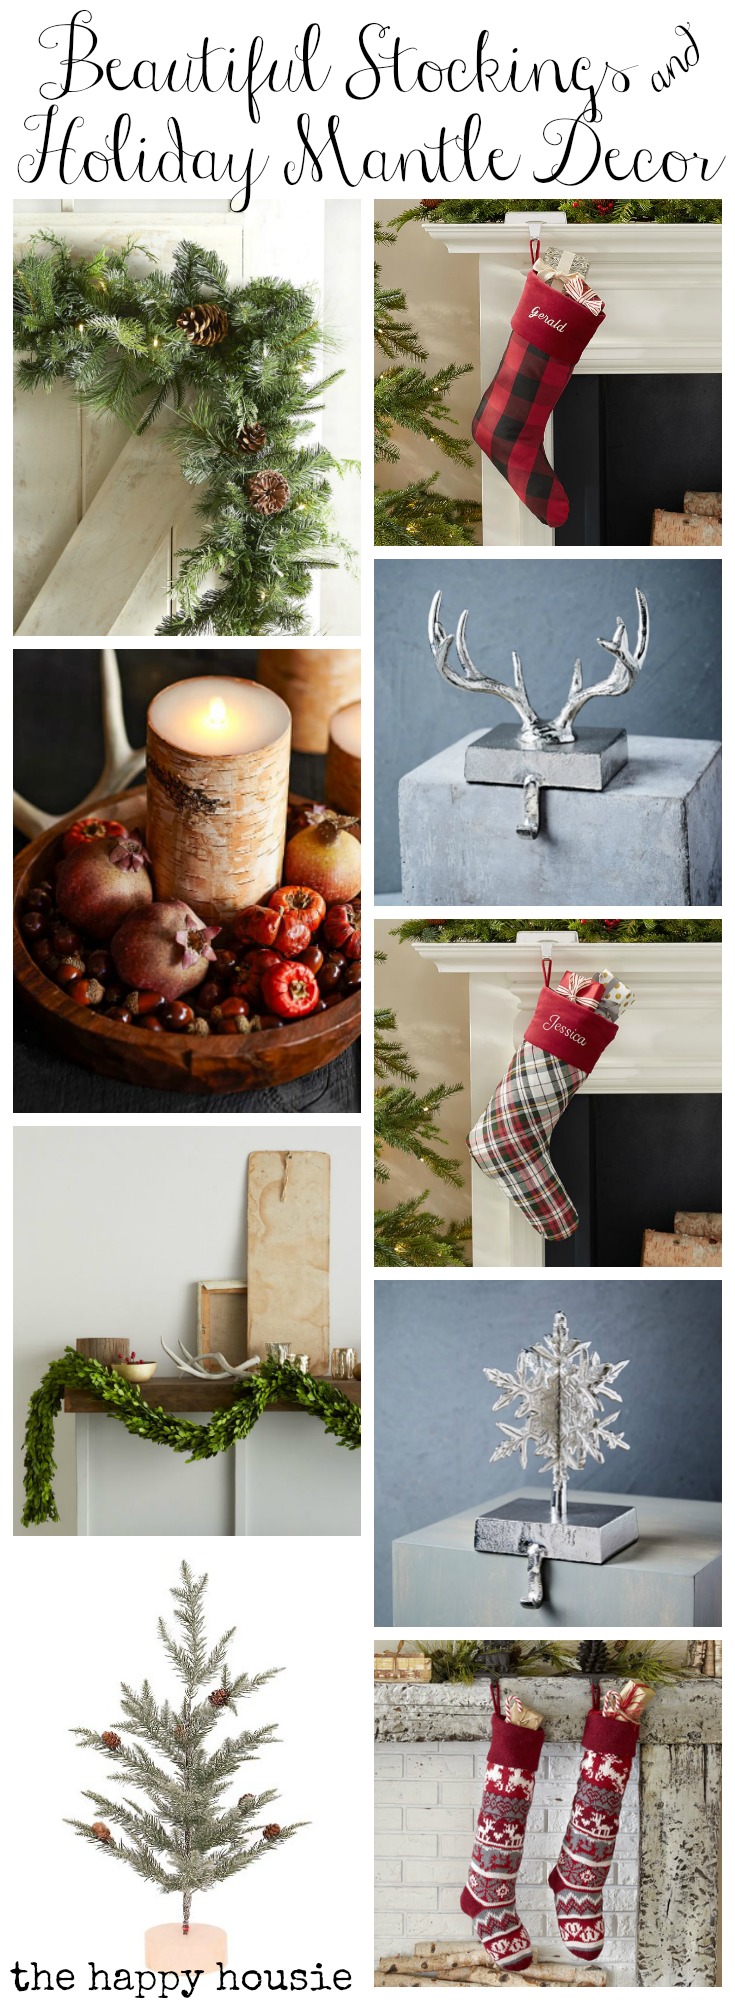 beautiful-stockings-and-holiday-mantle-decor-finds-at-the-happy-housie